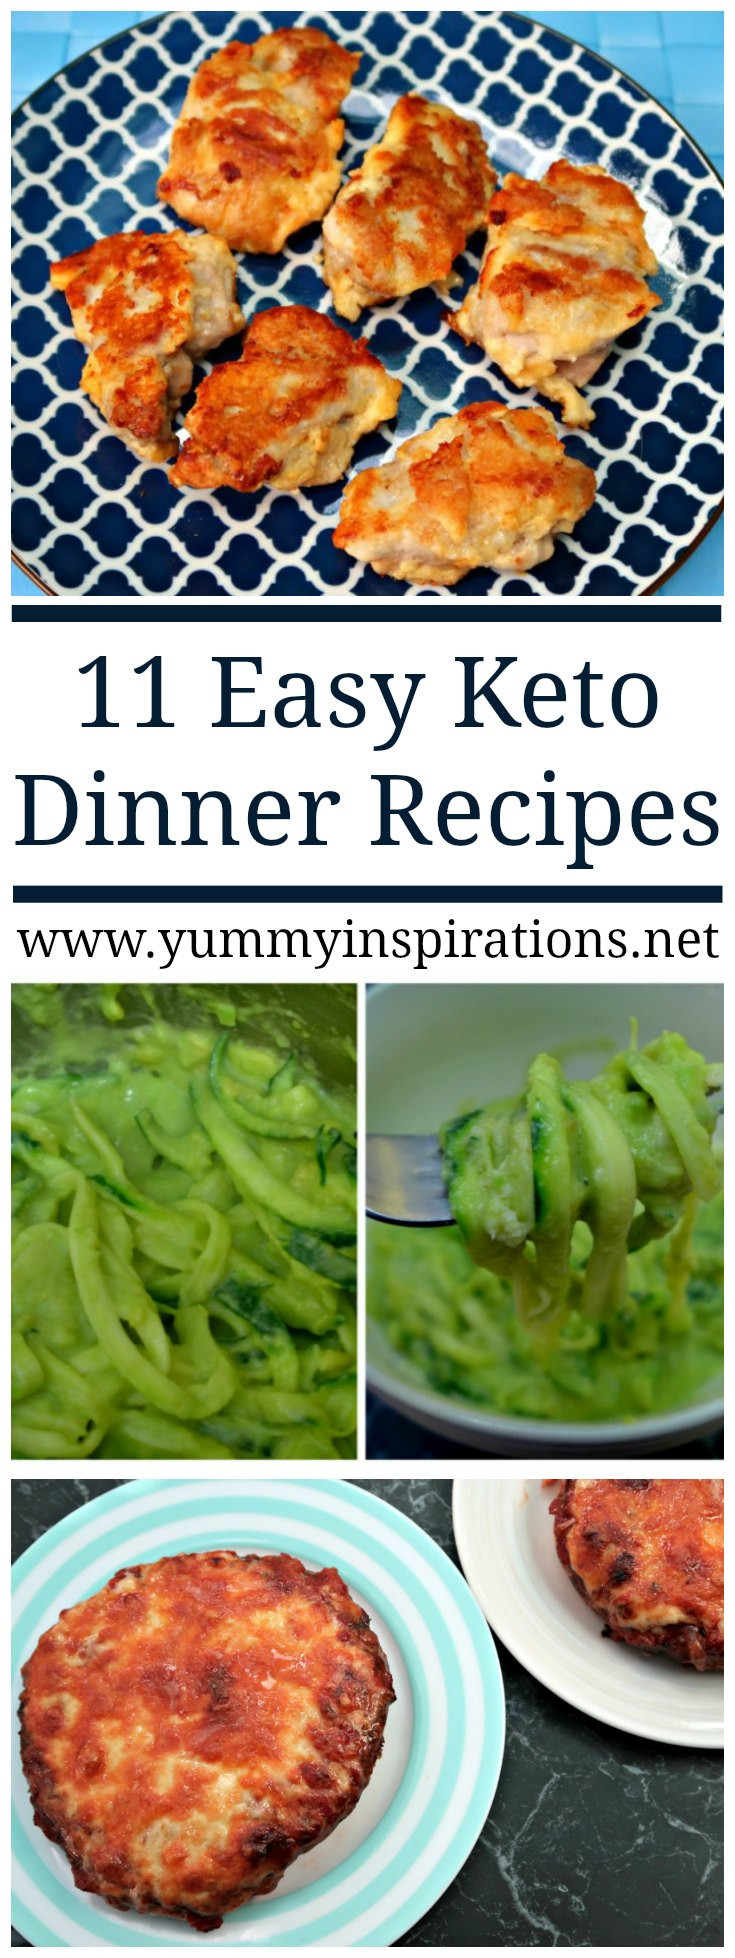 Keto Diet Recipes Videos Dinners
 11 Easy Keto Dinner Recipes Quick Low Carb Ketogenic